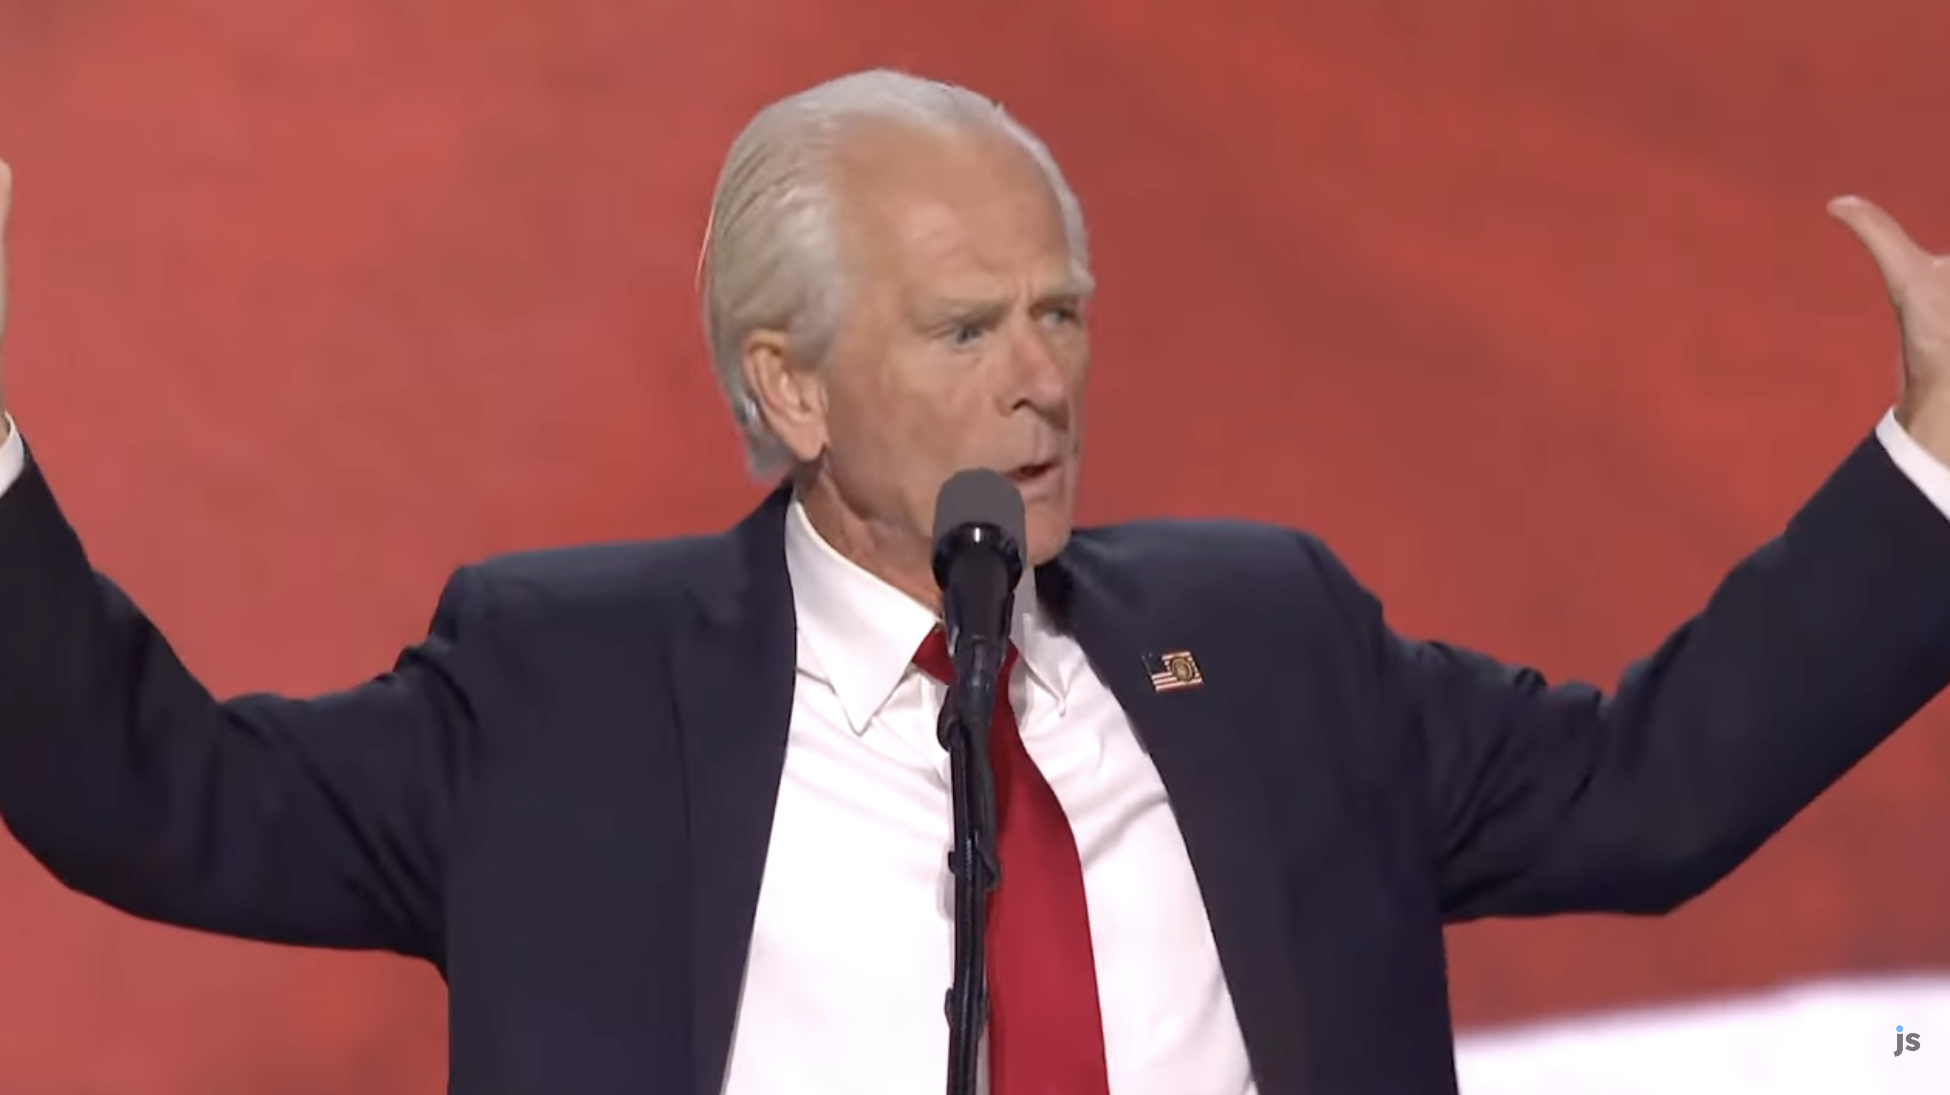 ElectionWatch 2024-Peter Navarro Just Out Of Jail Addresses GOP